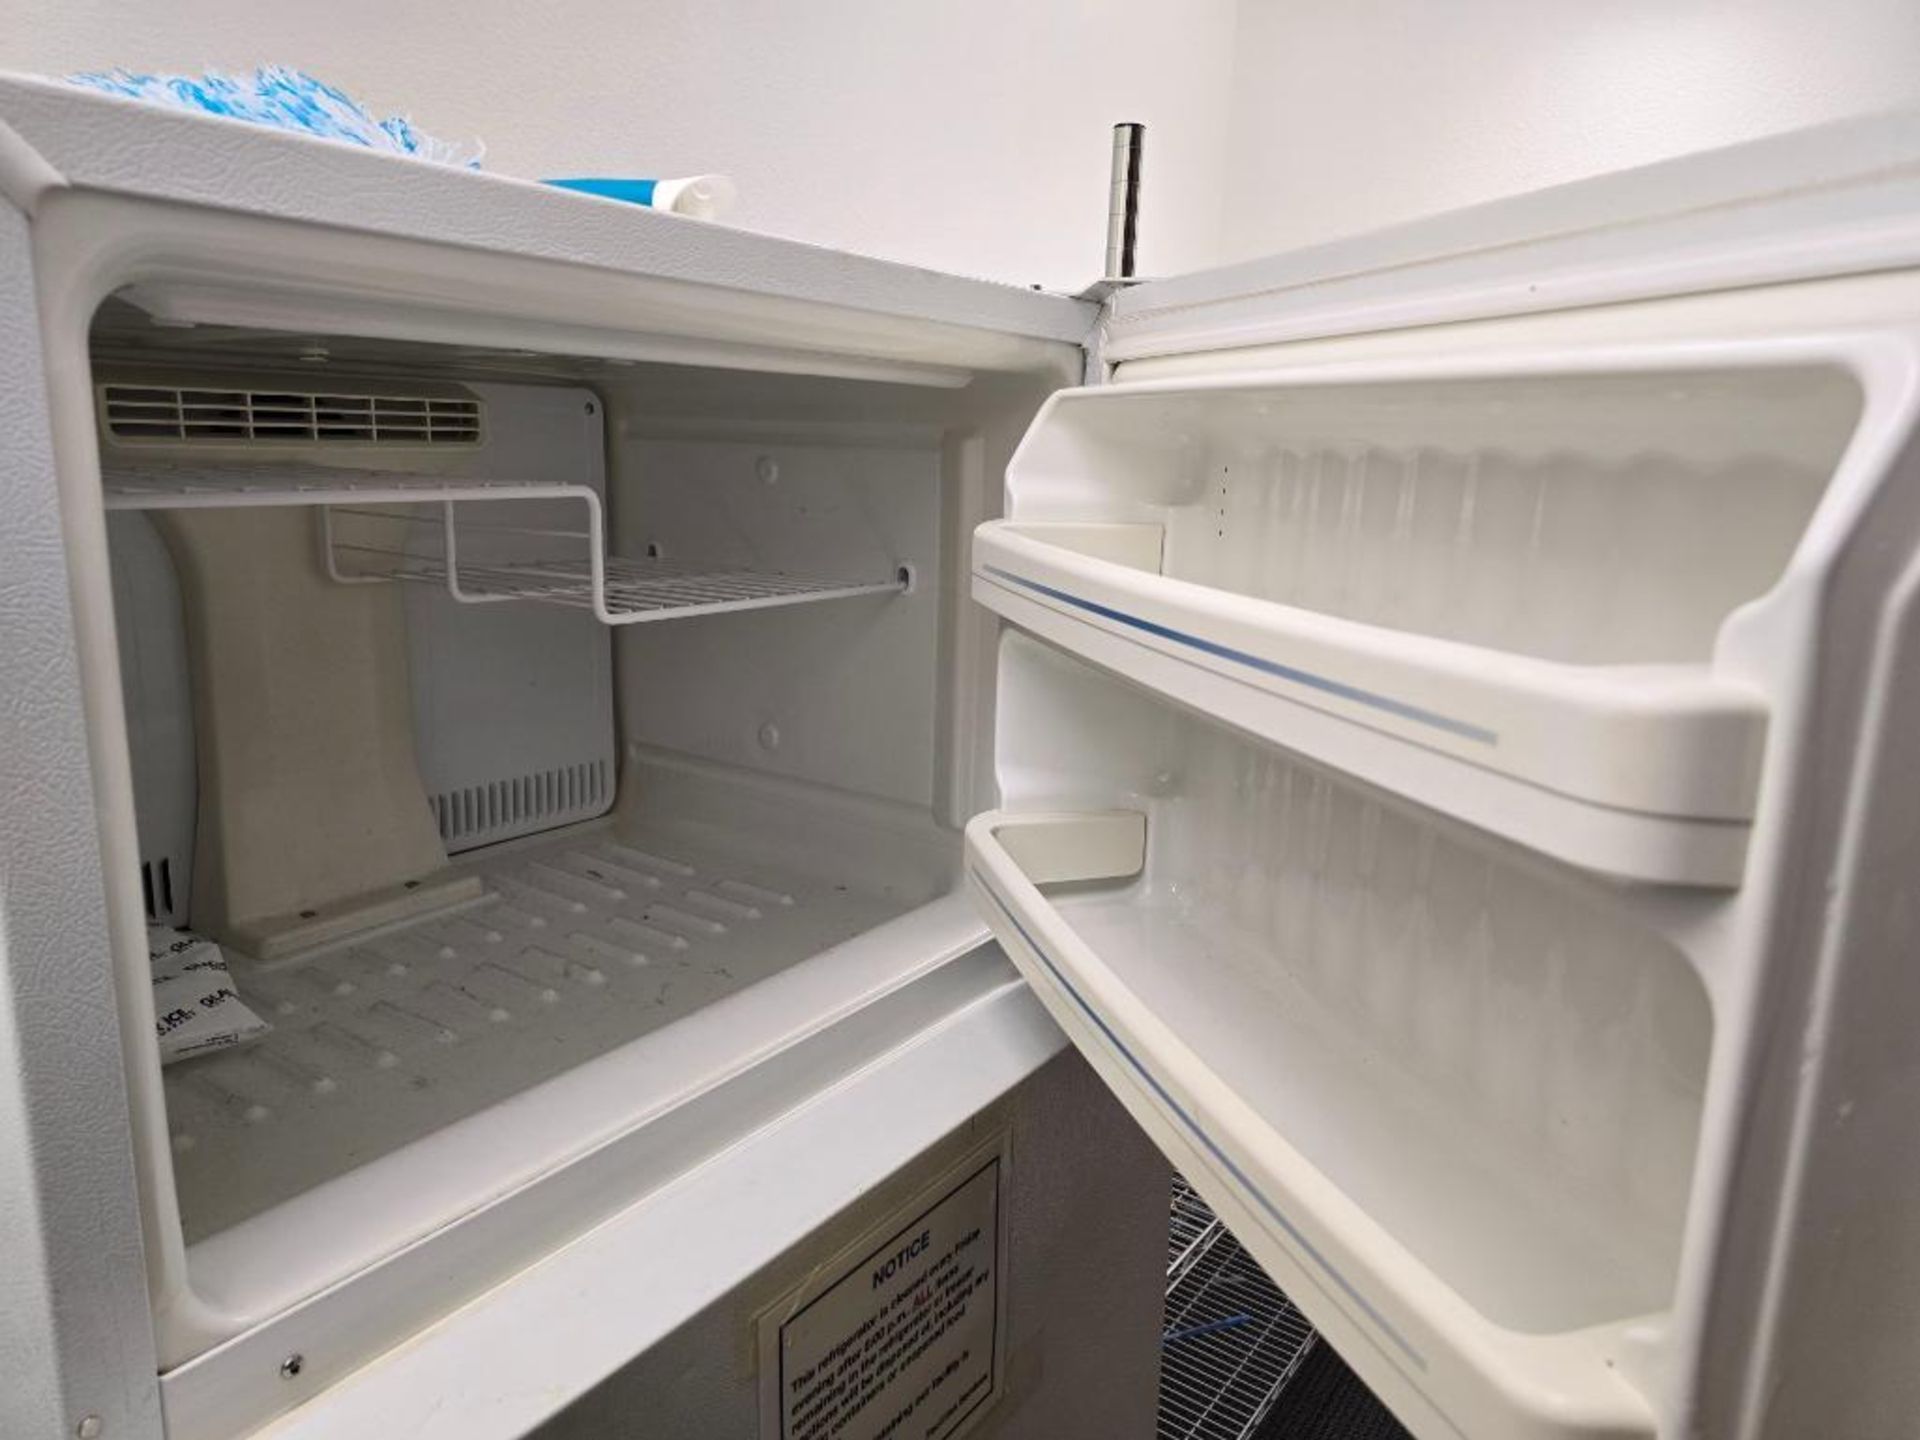 GE Household Refrigerator/Freezer ($20 Loading Fee Will Be Added To Buyer's Invoice) - Image 4 of 6